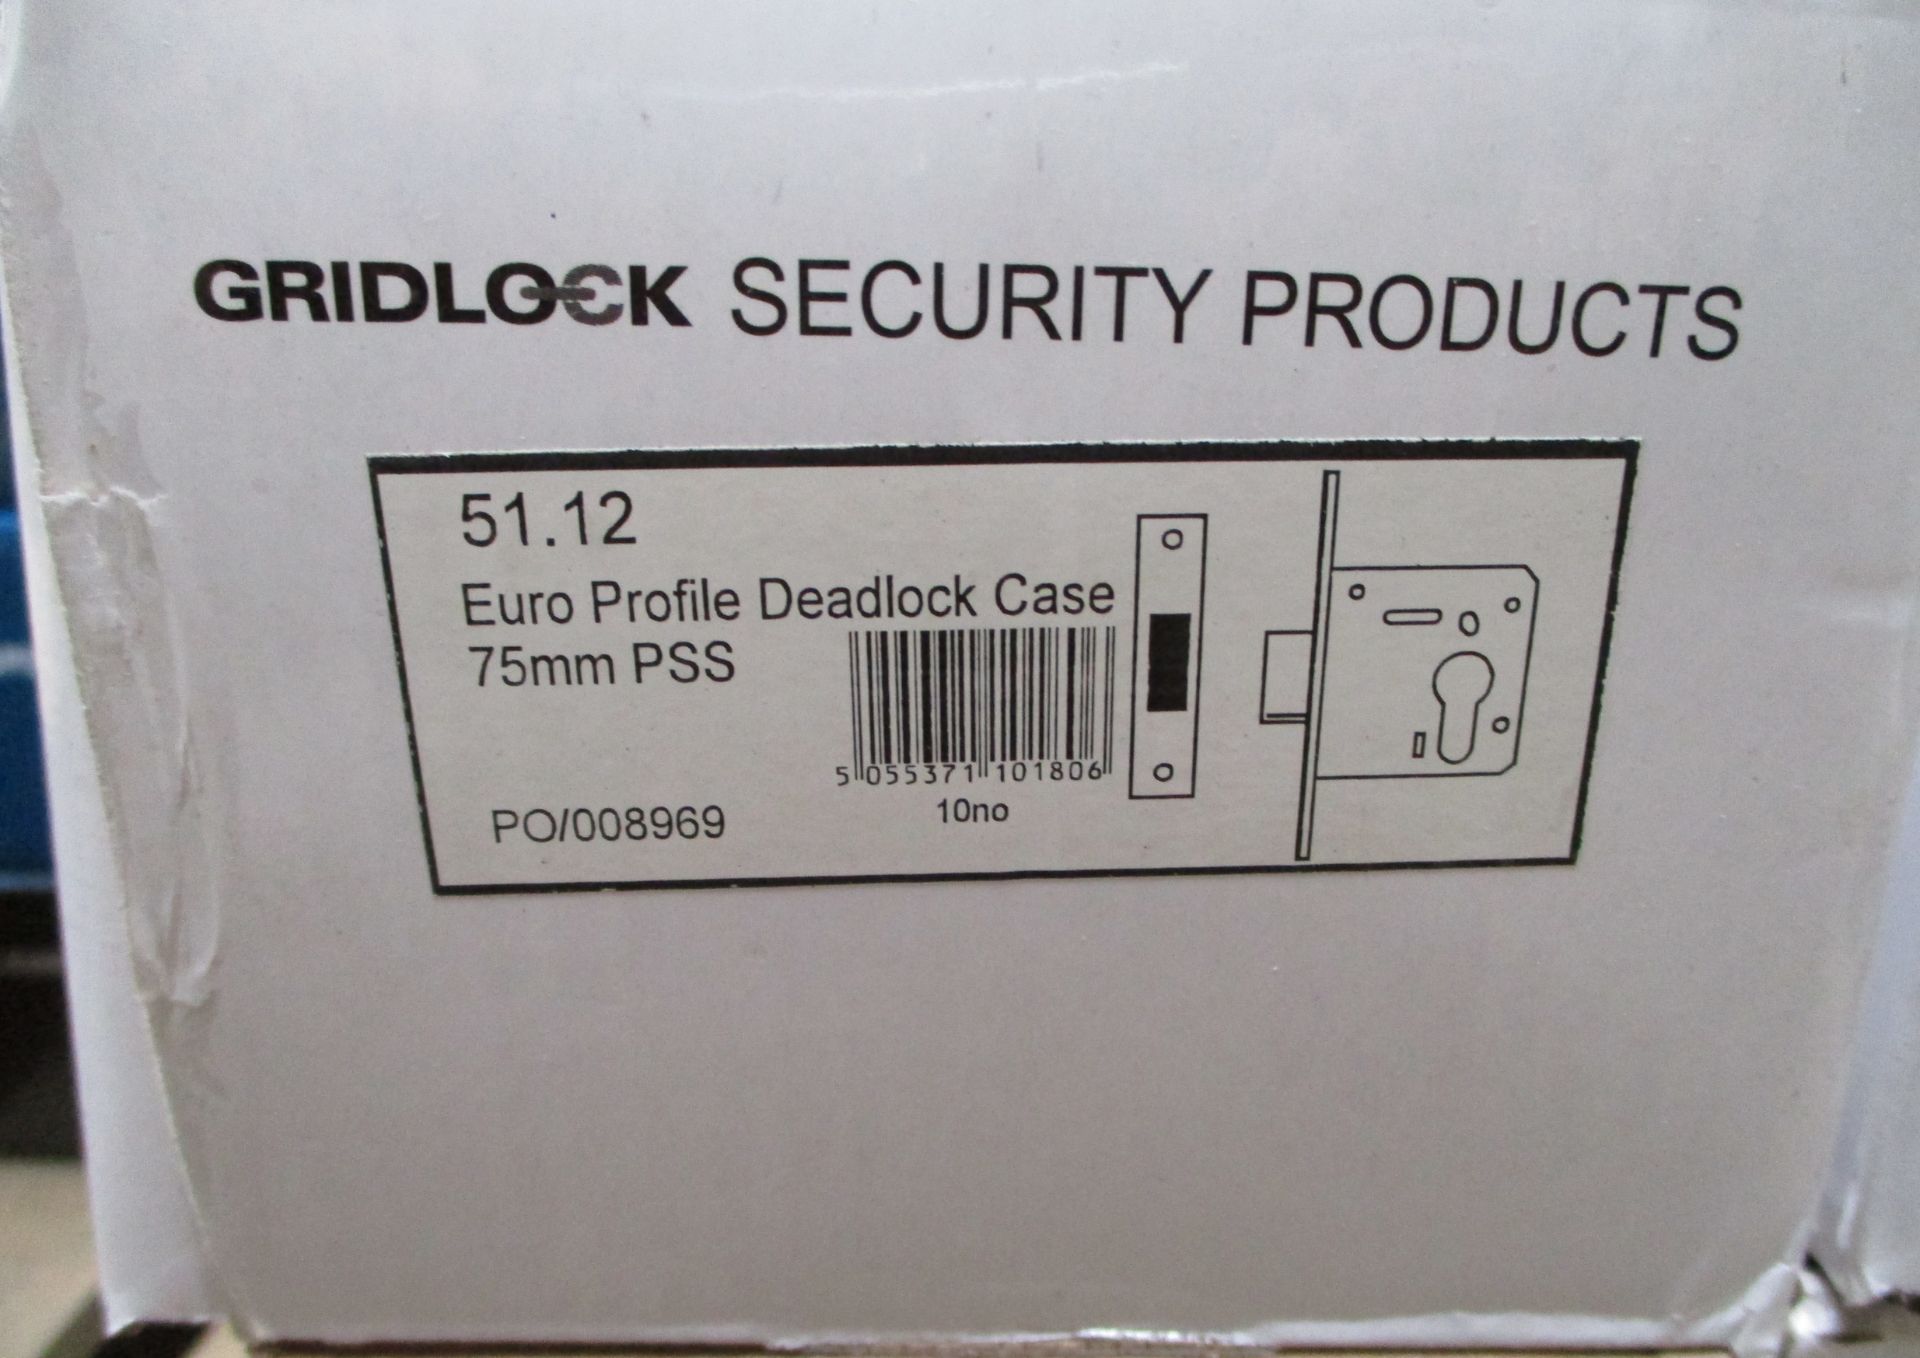 12 x Gridlock Euro Profile Deadlock Cases 75mm PSS - Brand New Stock - Product Code: 51.12 - CL538 - - Image 2 of 4